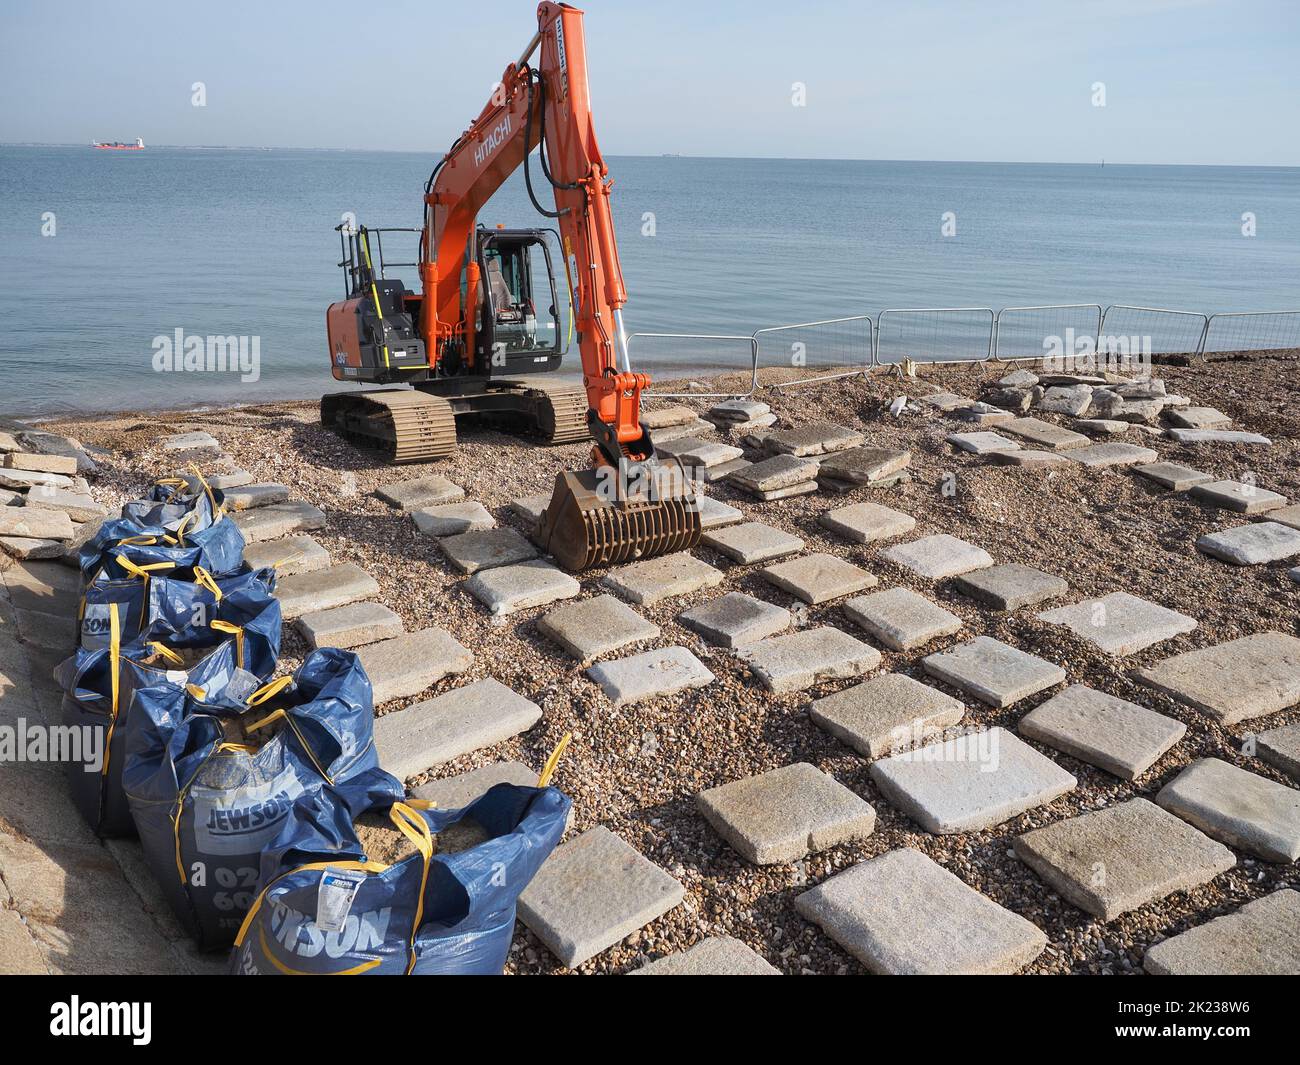 Sheerness, Kent, UK. 22nd Sep, 2022. Environment Agency contractors undertake repairs to the sea wall at Sheerness, Kent ahead of winter storms. A large number of flagstones were washed out by storms earlier this year in March and April, leaving the EA with a 'giant puzzle' of how to reinstate the flagstones they have recovered to fit the 'hole' in the sea wall. Credit: James Bell/Alamy Live News Stock Photo